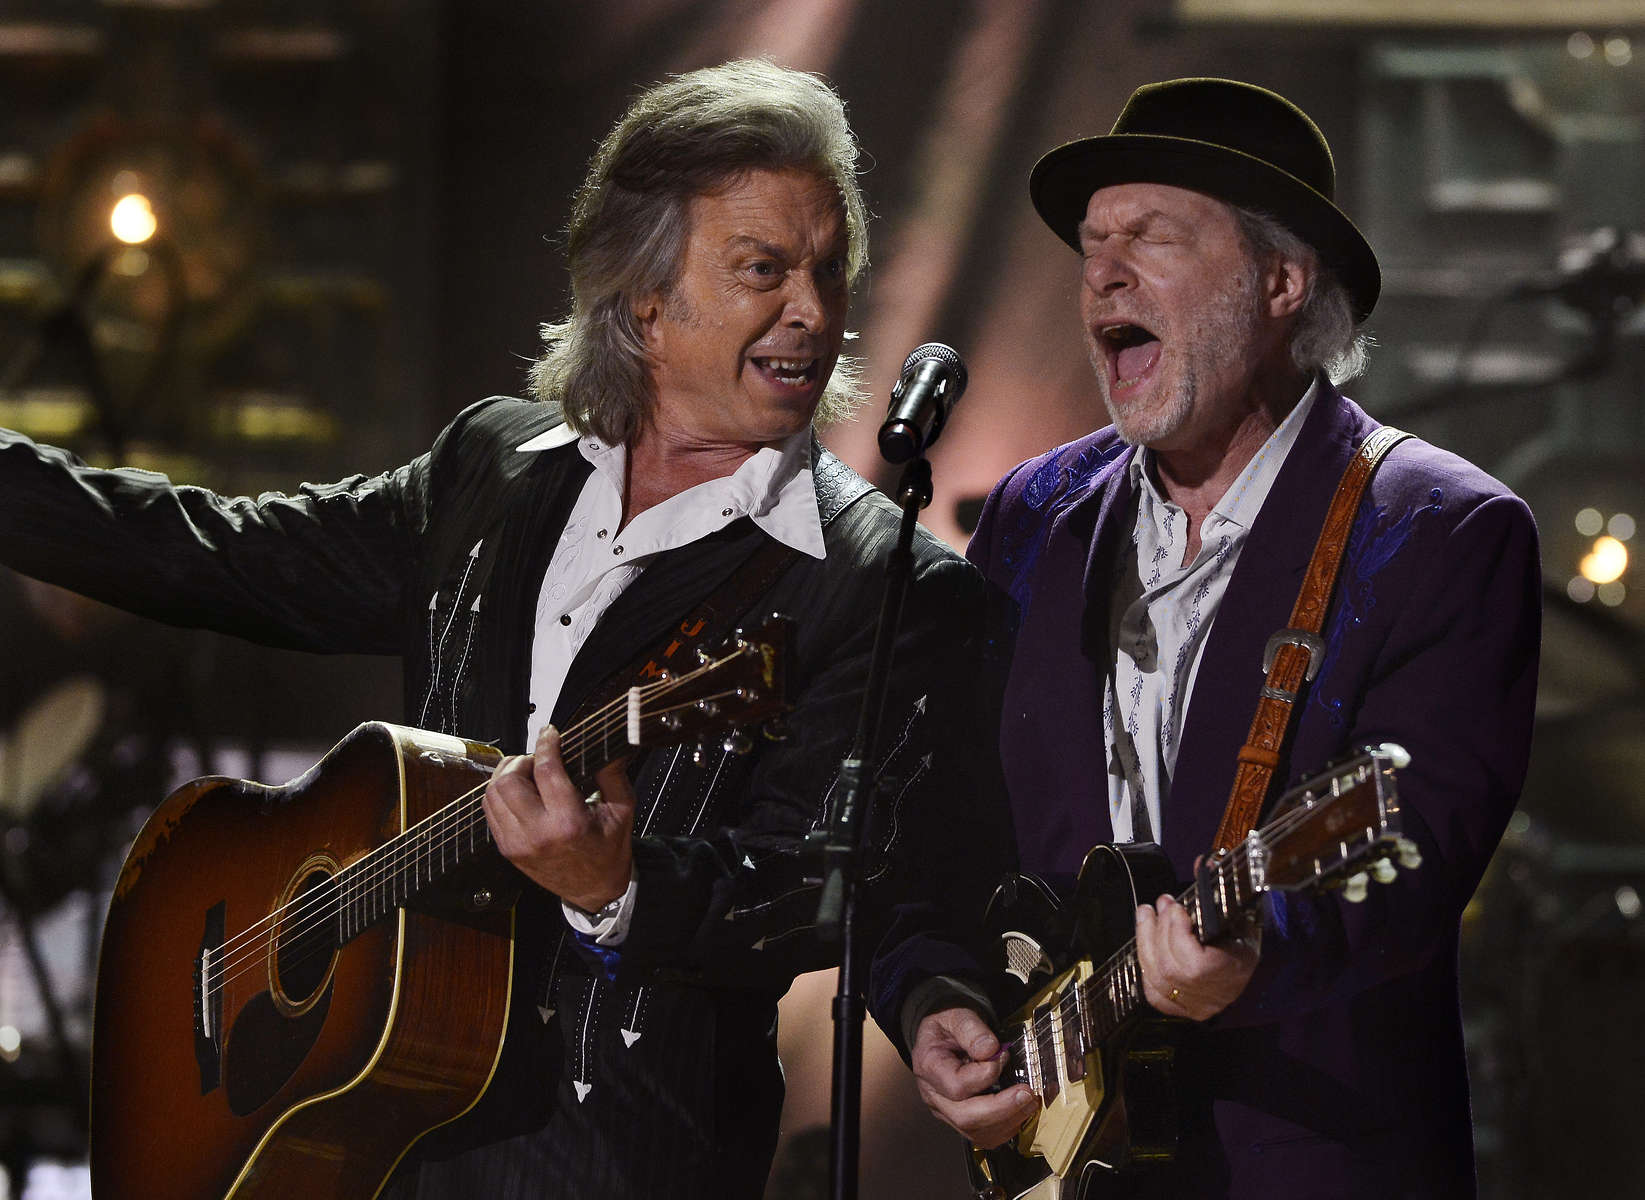 Jim Lauderdale, left, and Buddy Miller perform during the 2014 Americana Music Honors and Awards in Nashville, Tenn. (AP Photo/ Mark Zaleski)